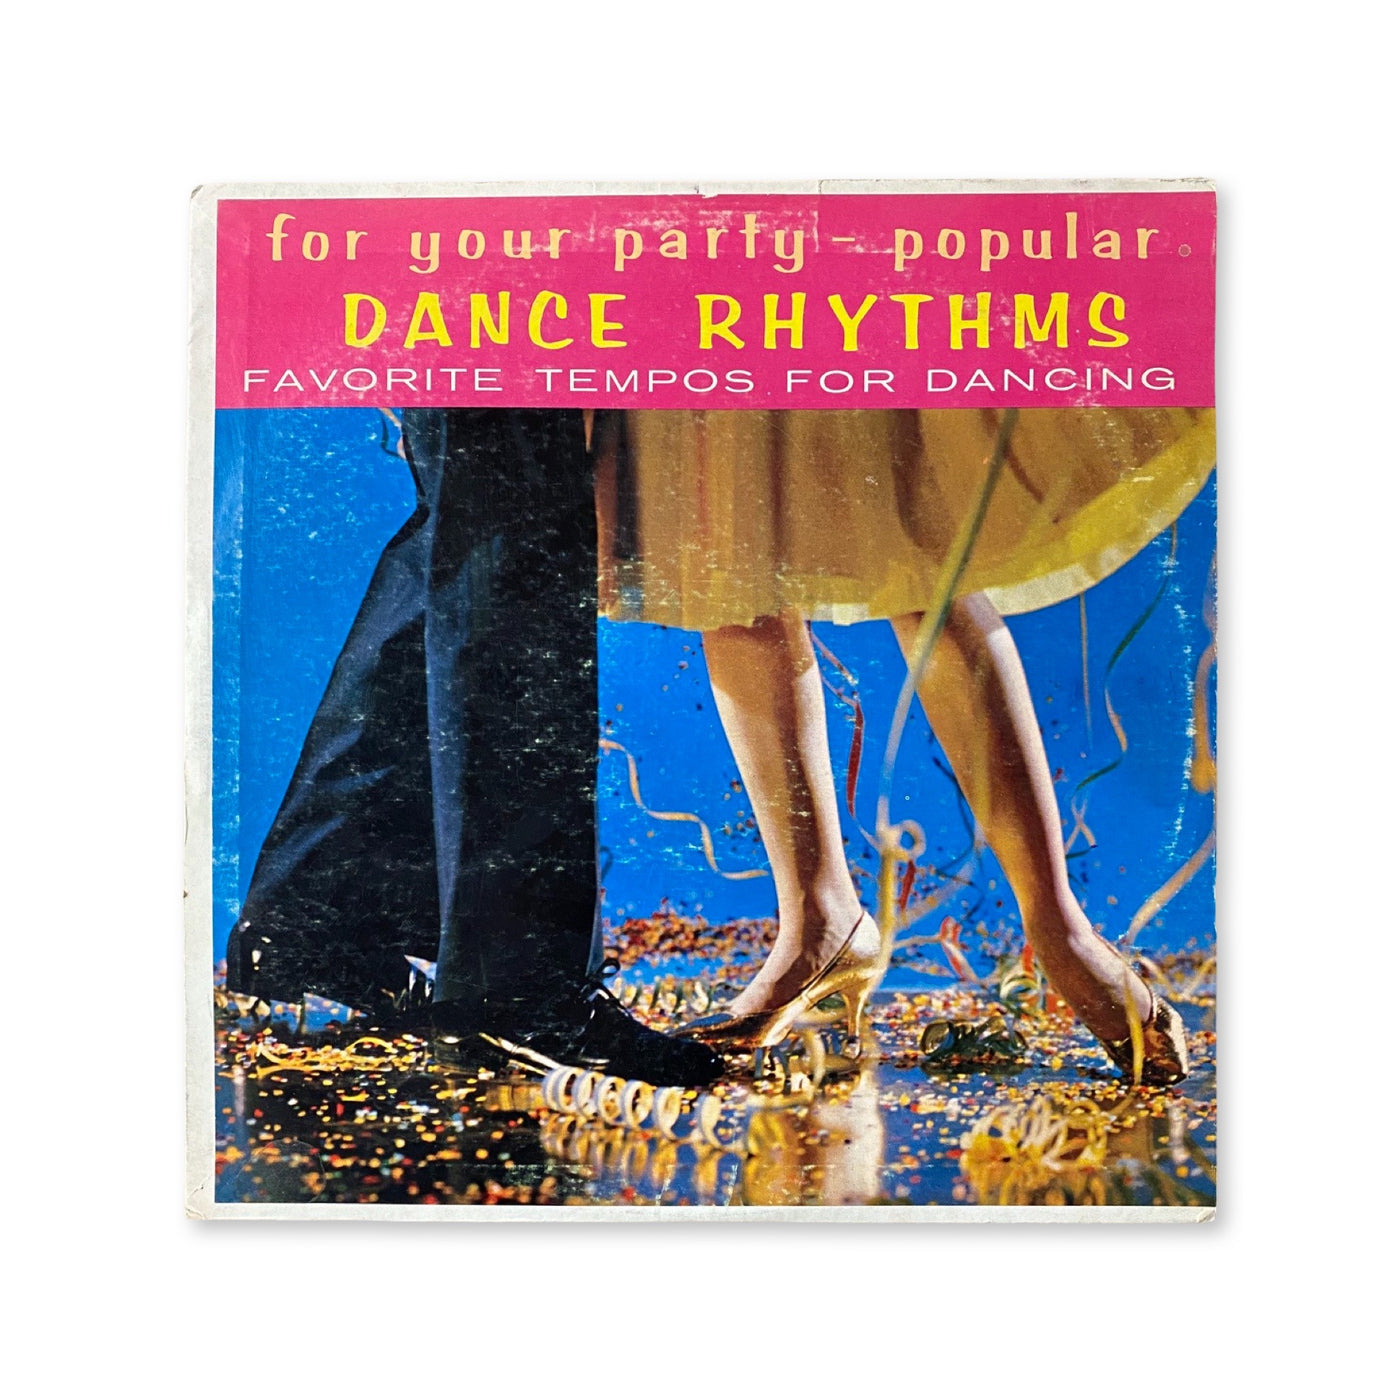 The Statler Dance Orchestra - Tito Morano - The Poll Winners Of 1940 - Fats And The Chessmen, Skip Martin - For Your Party - Popular Dance Rhythms